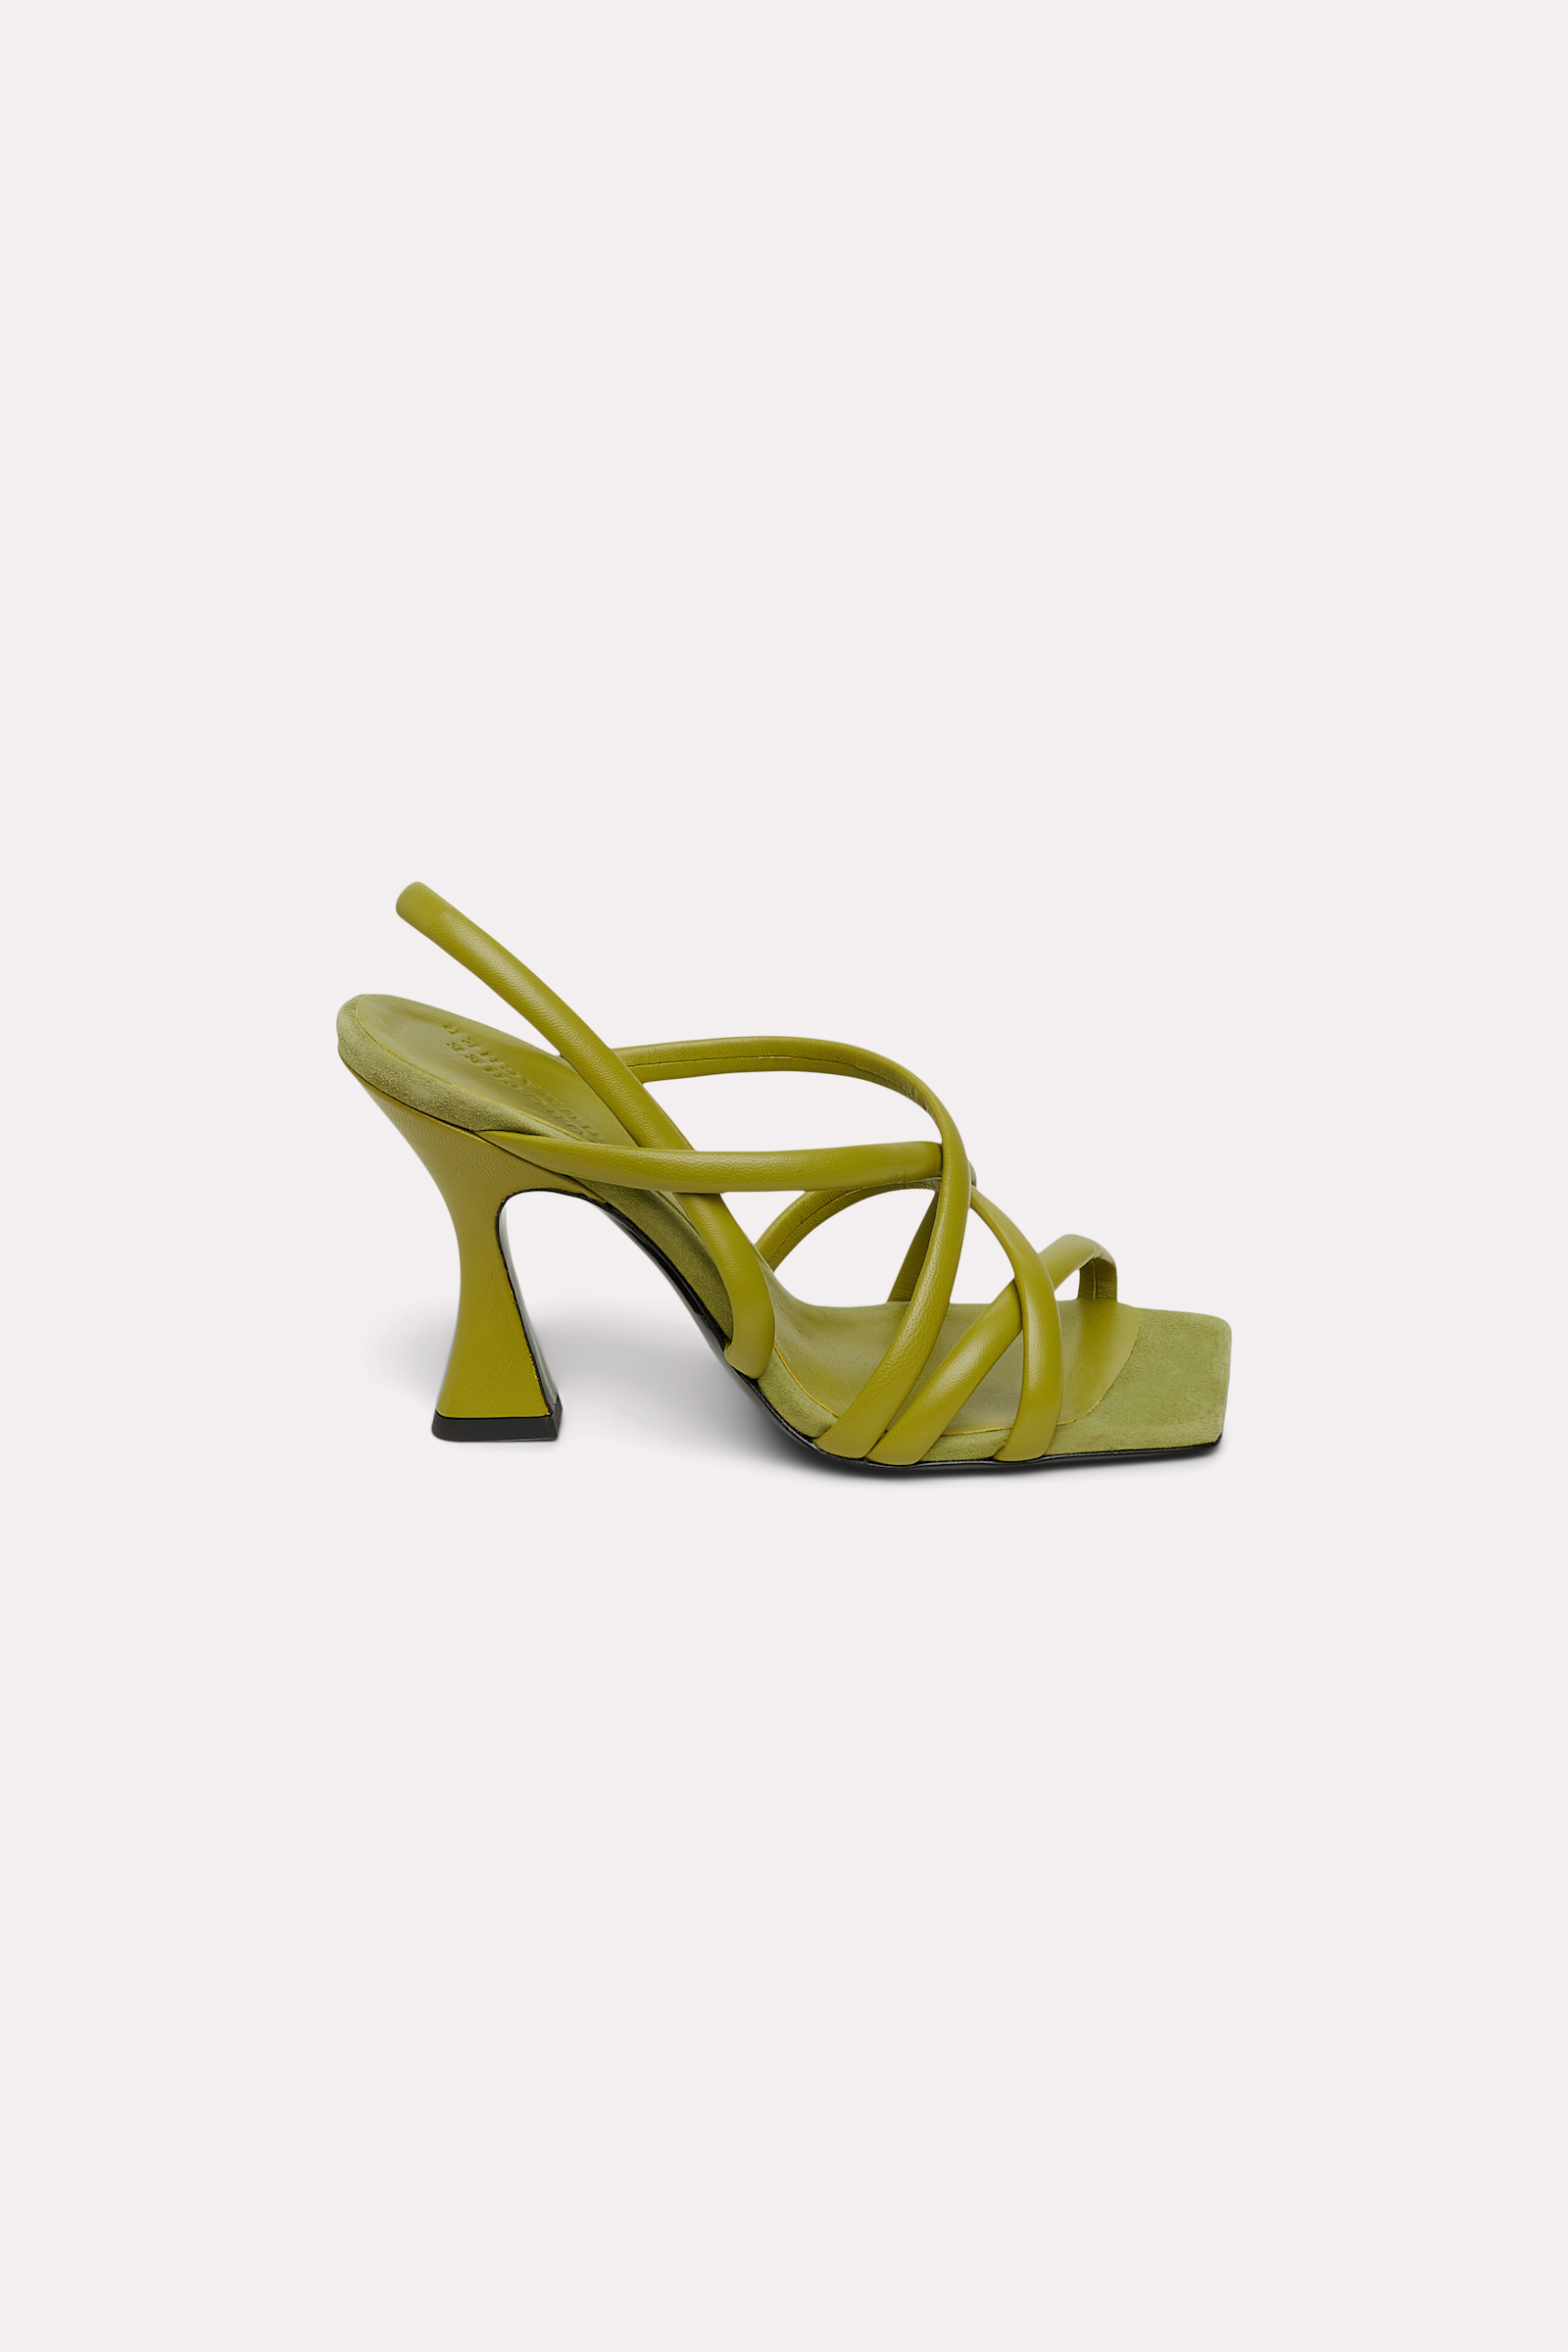 Dorothee Schumacher Puffed leather sandals with louis heel moss green